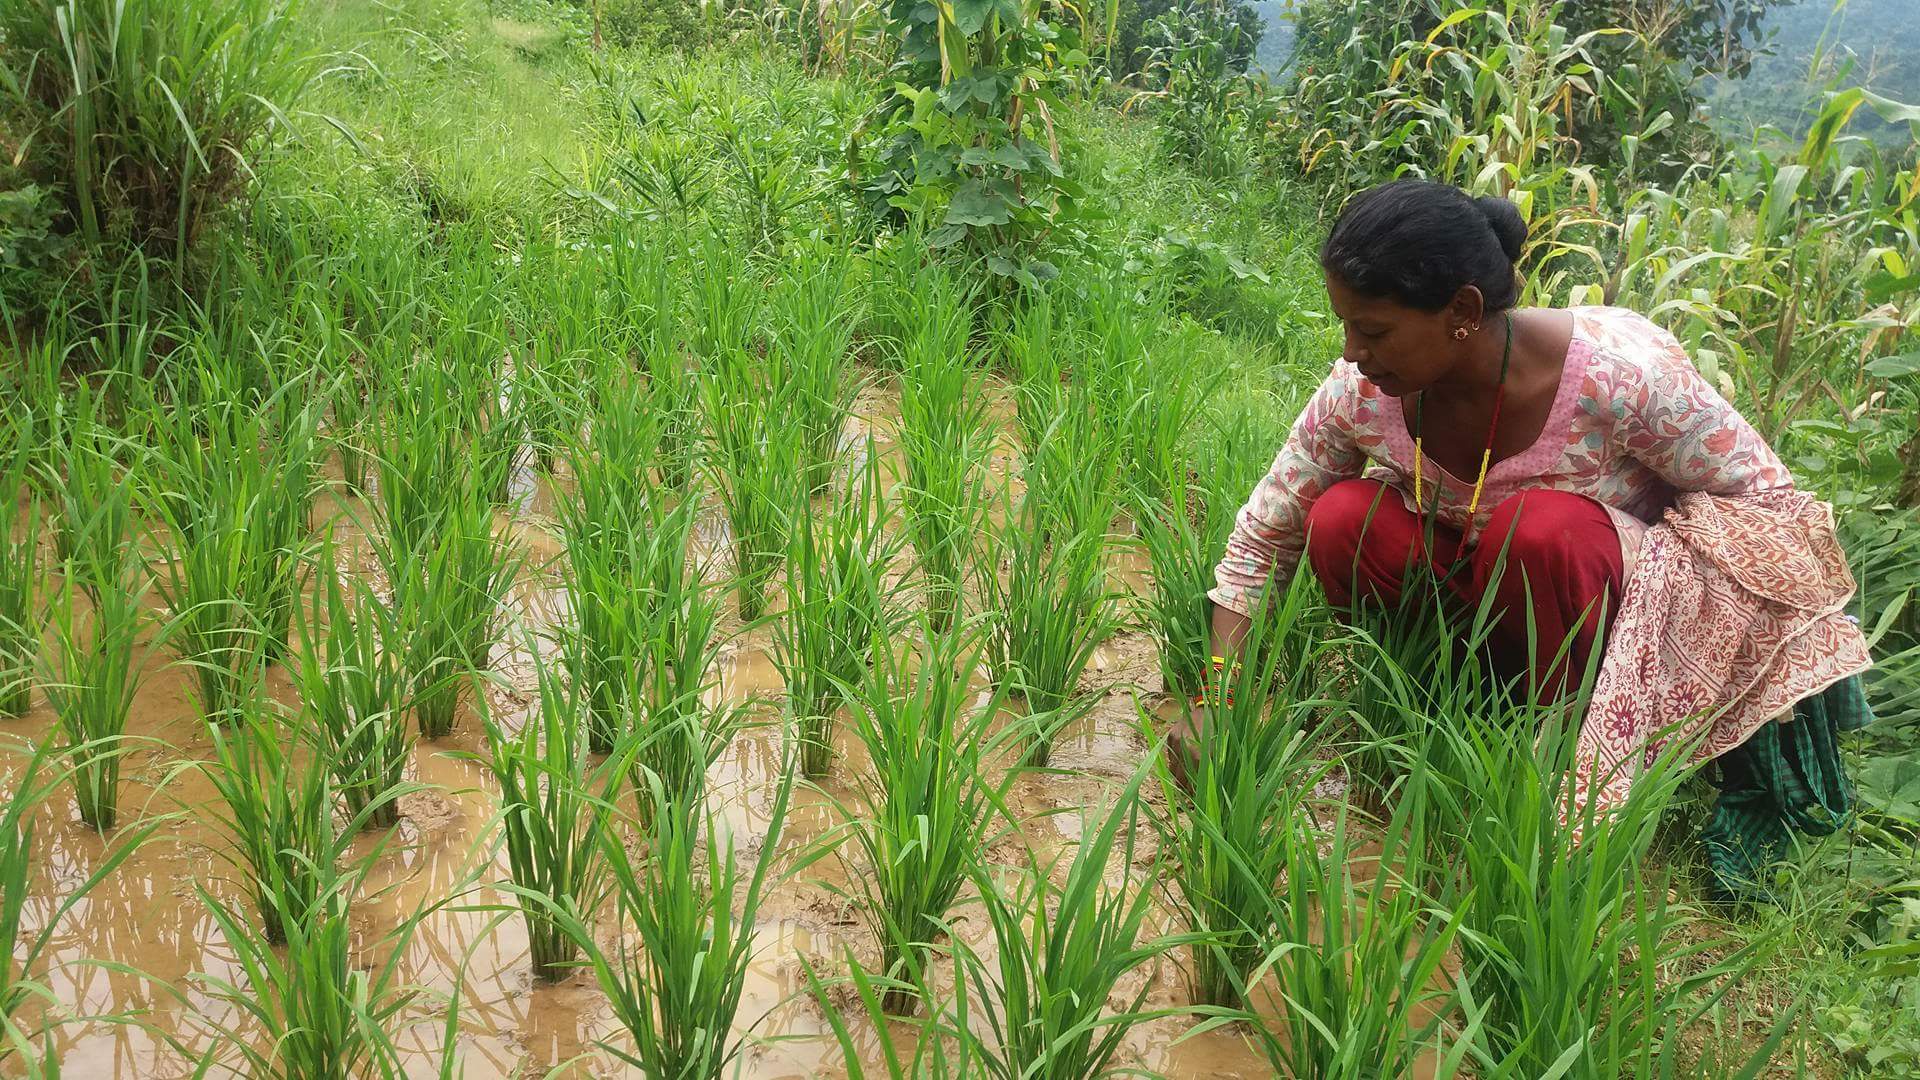 The SRI is a farming methodology aimed at increasing the yield of rice.